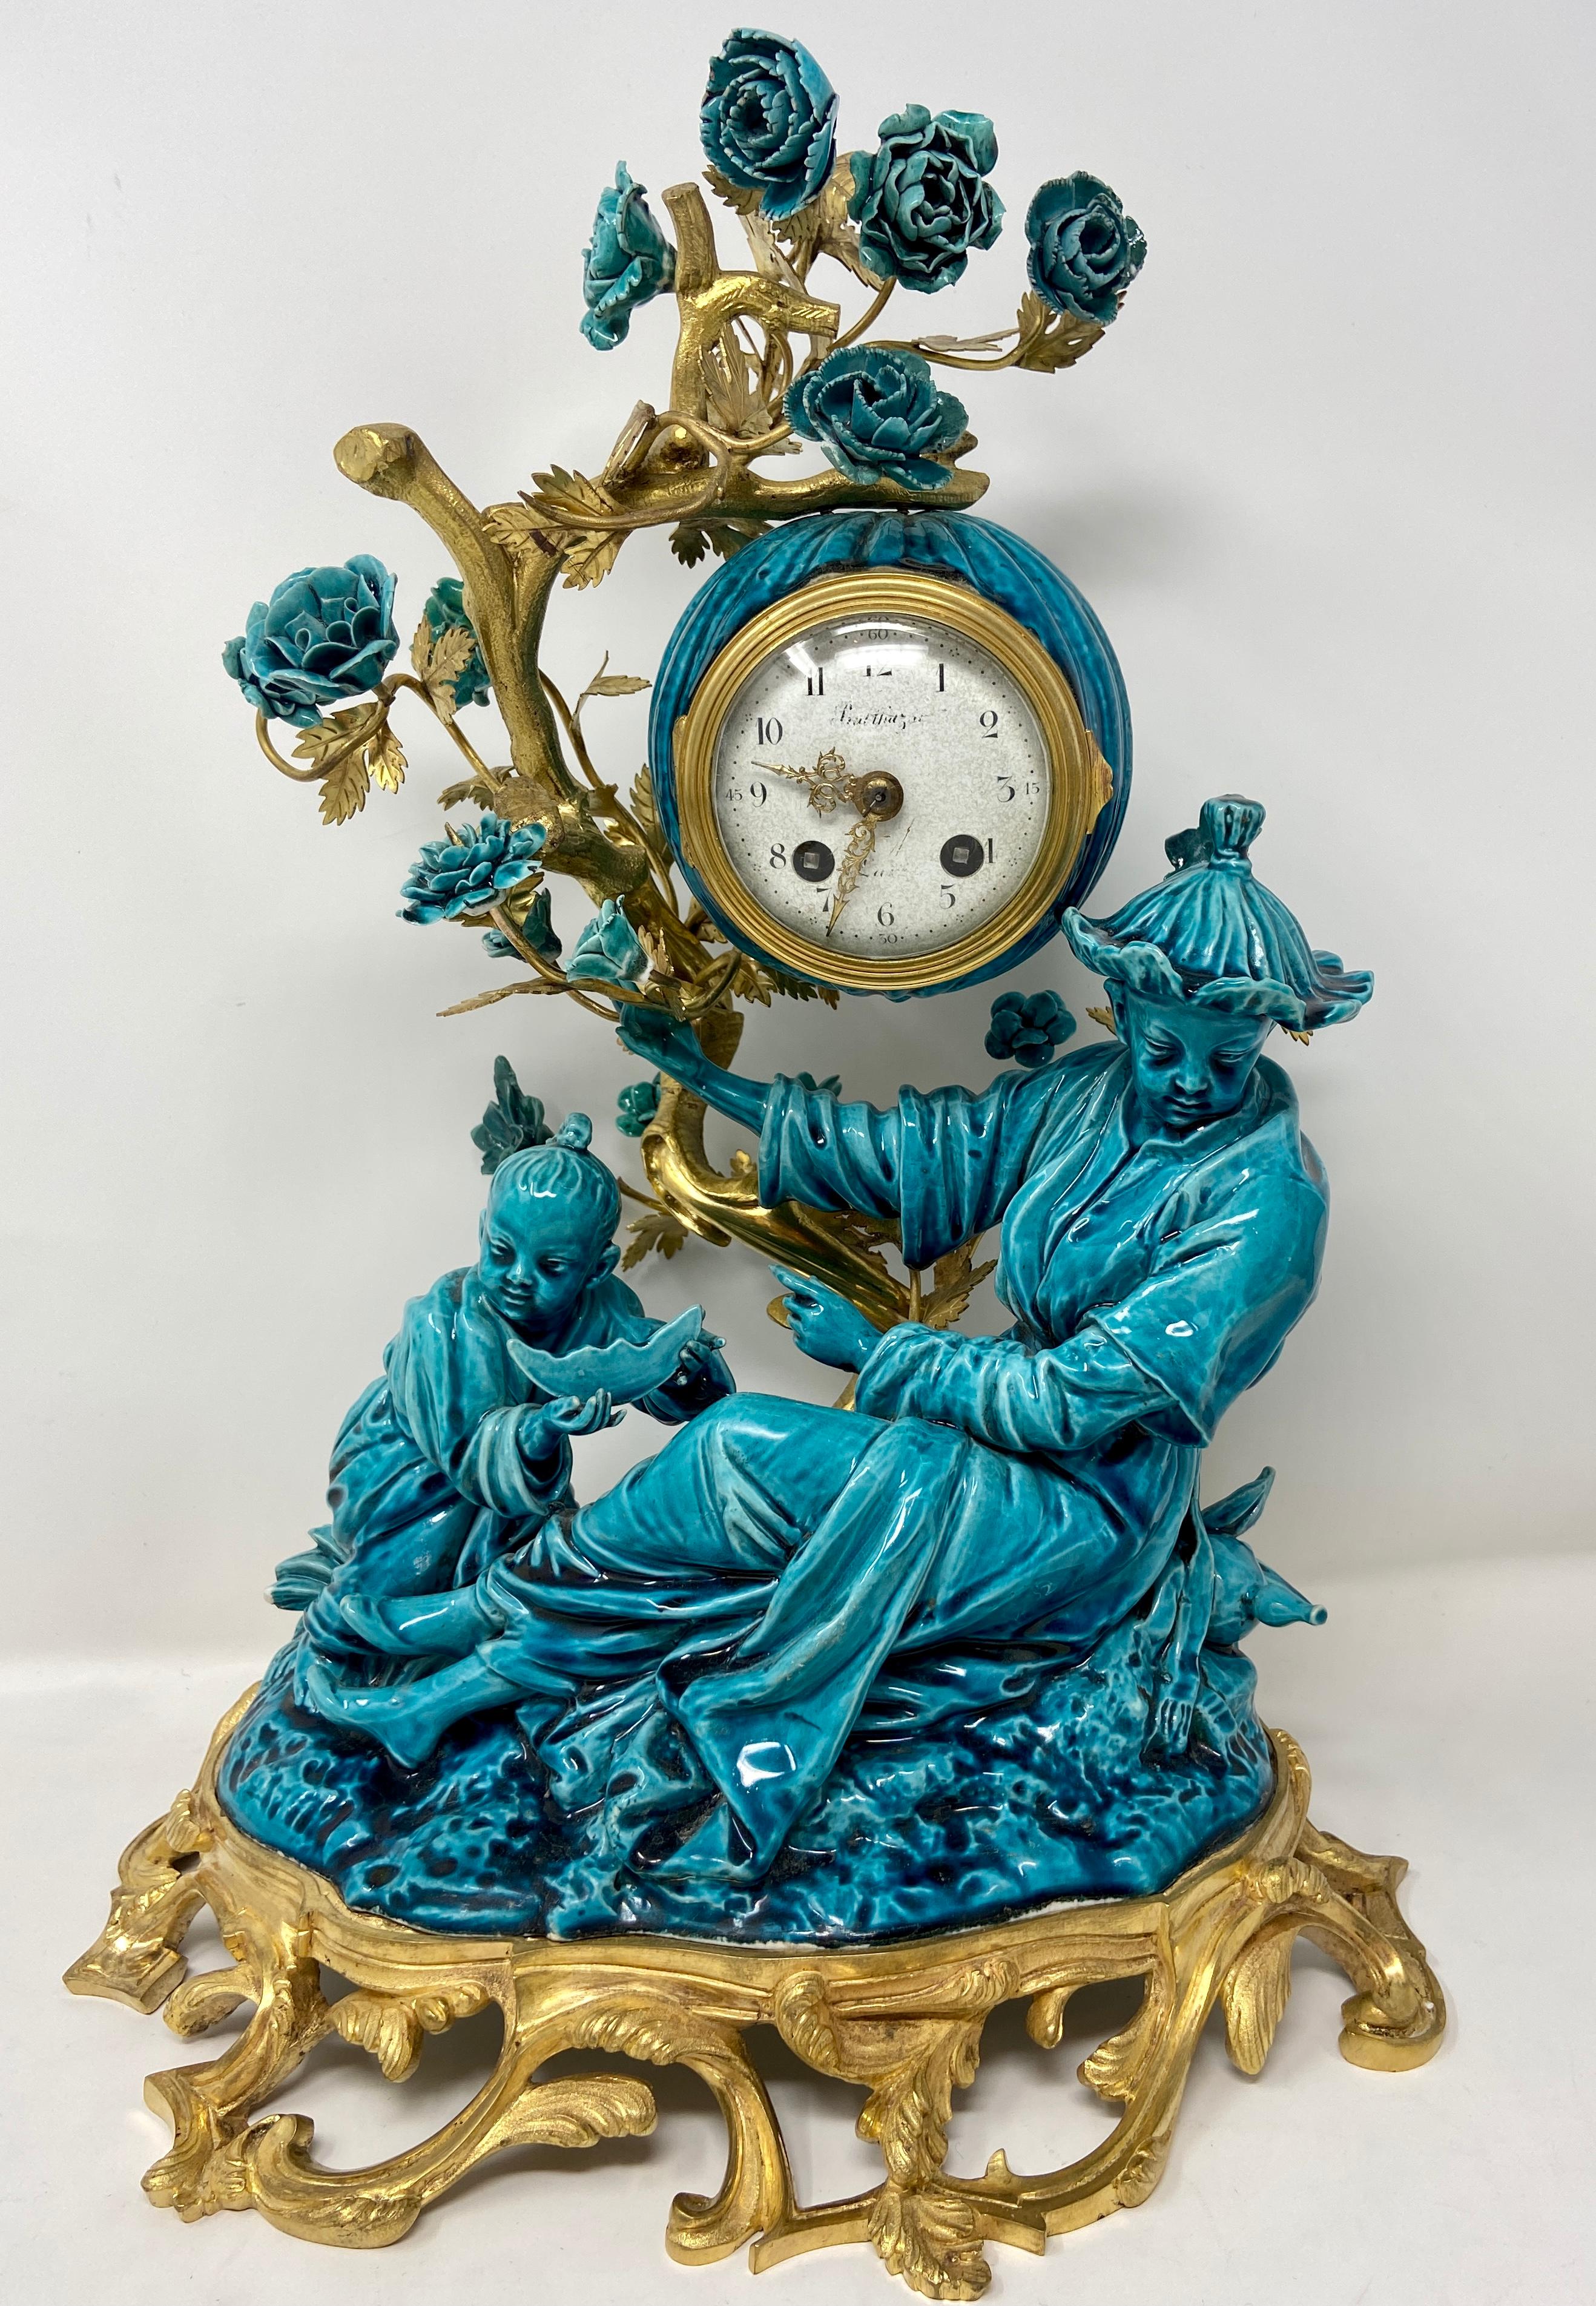 19th Century Antique French Chinoiserie Gold Bronze & Turquoise Porcelain Garniture Clock Set